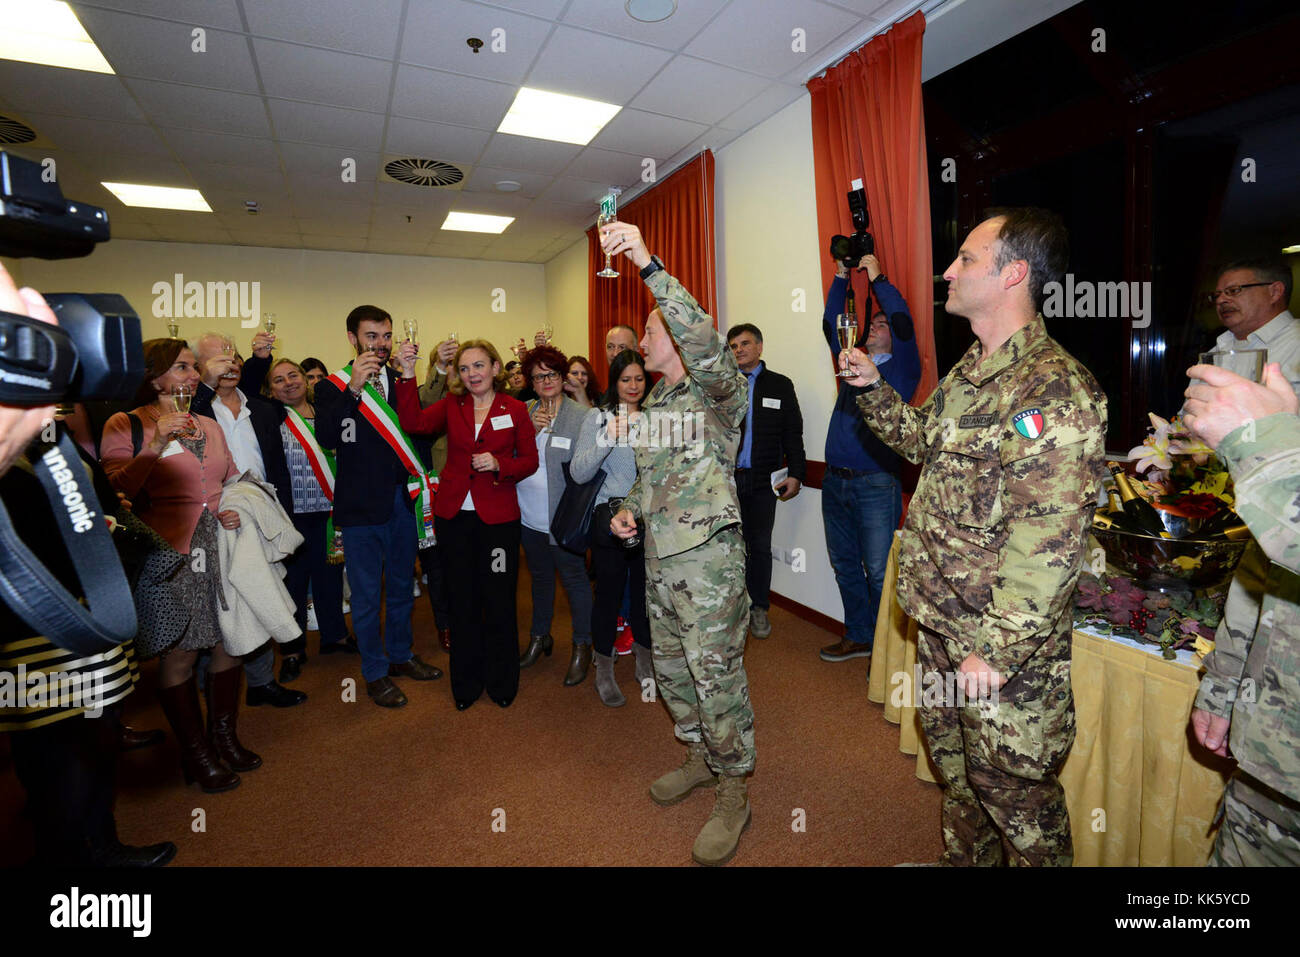 U.S. Col. Eric M. Berdy, U.S. Army Garrison Italy commander, toast with participants at the annual Meet the Mayors event at the Golden Lion Conference Center on Caserma Ederle, Vicenza, Italy, Nov. 8, 2017.   The event brings the American and Italian communities together and gives Italian locals an opportunity to share their cultural heritage with the military community. (U.S. Army Photo by Paolo Bovo) Stock Photo